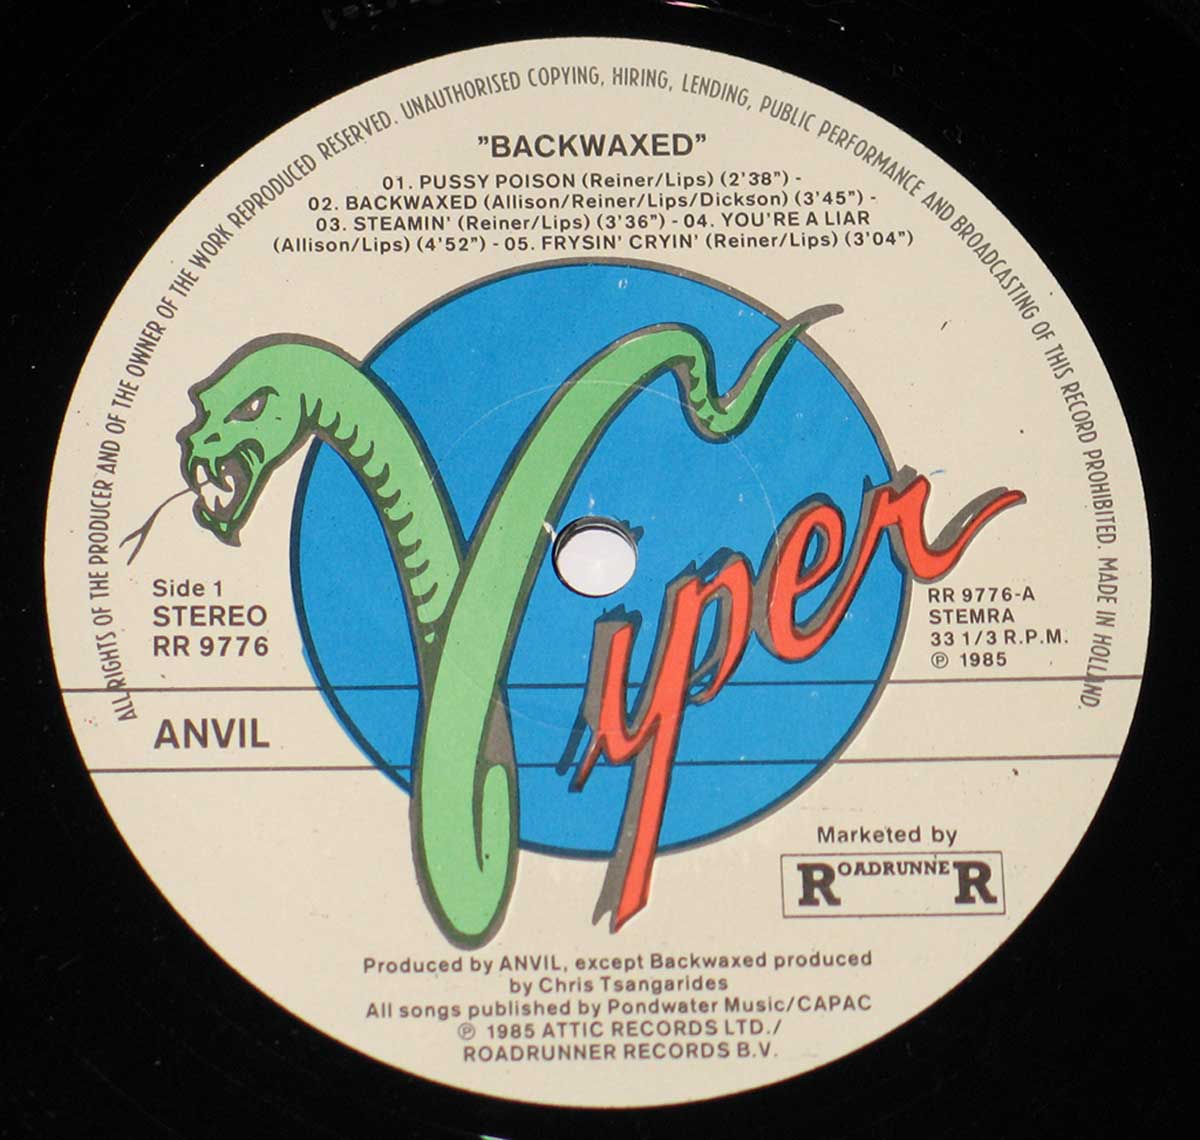 Enlarged High Resolution Photo of the Record's label ANVIL - Backwaxed https://vinyl-records.nl